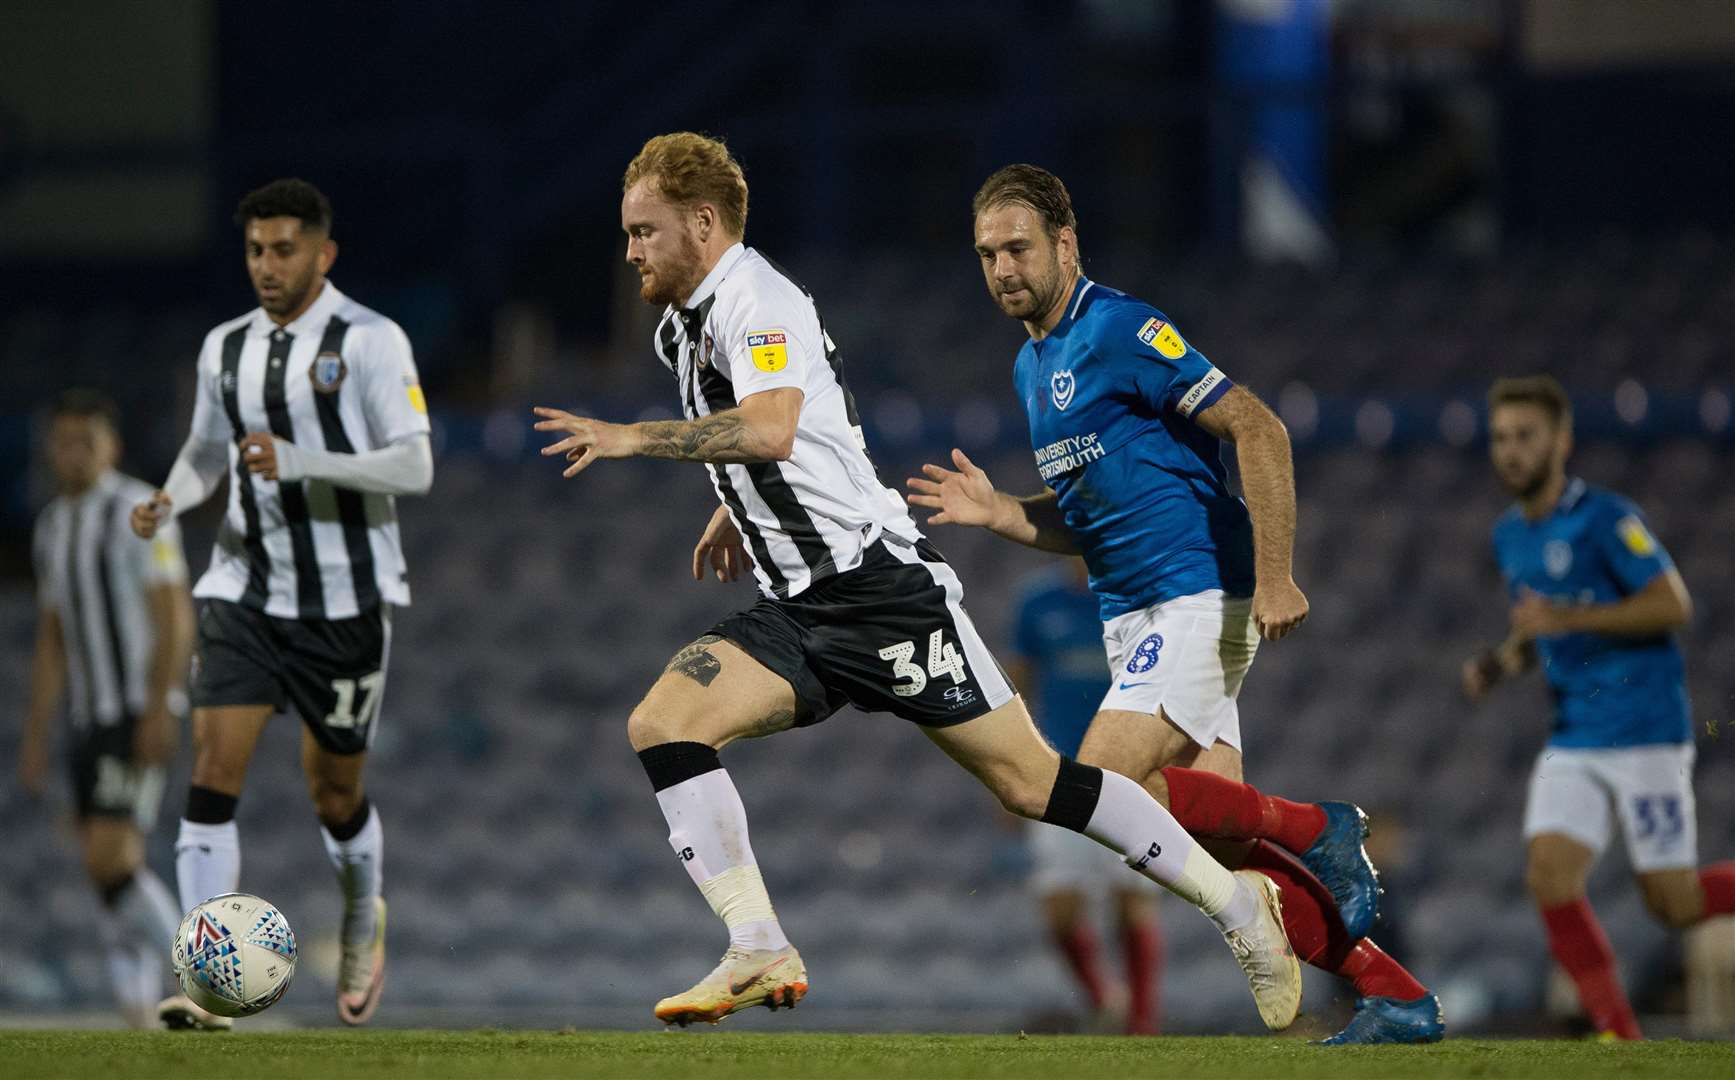 Gillingham’s Connor Ogilvie gets away from Brett Pitman during the Checkatrade Trophy match at Portsmouth Picture: Ady Kerry